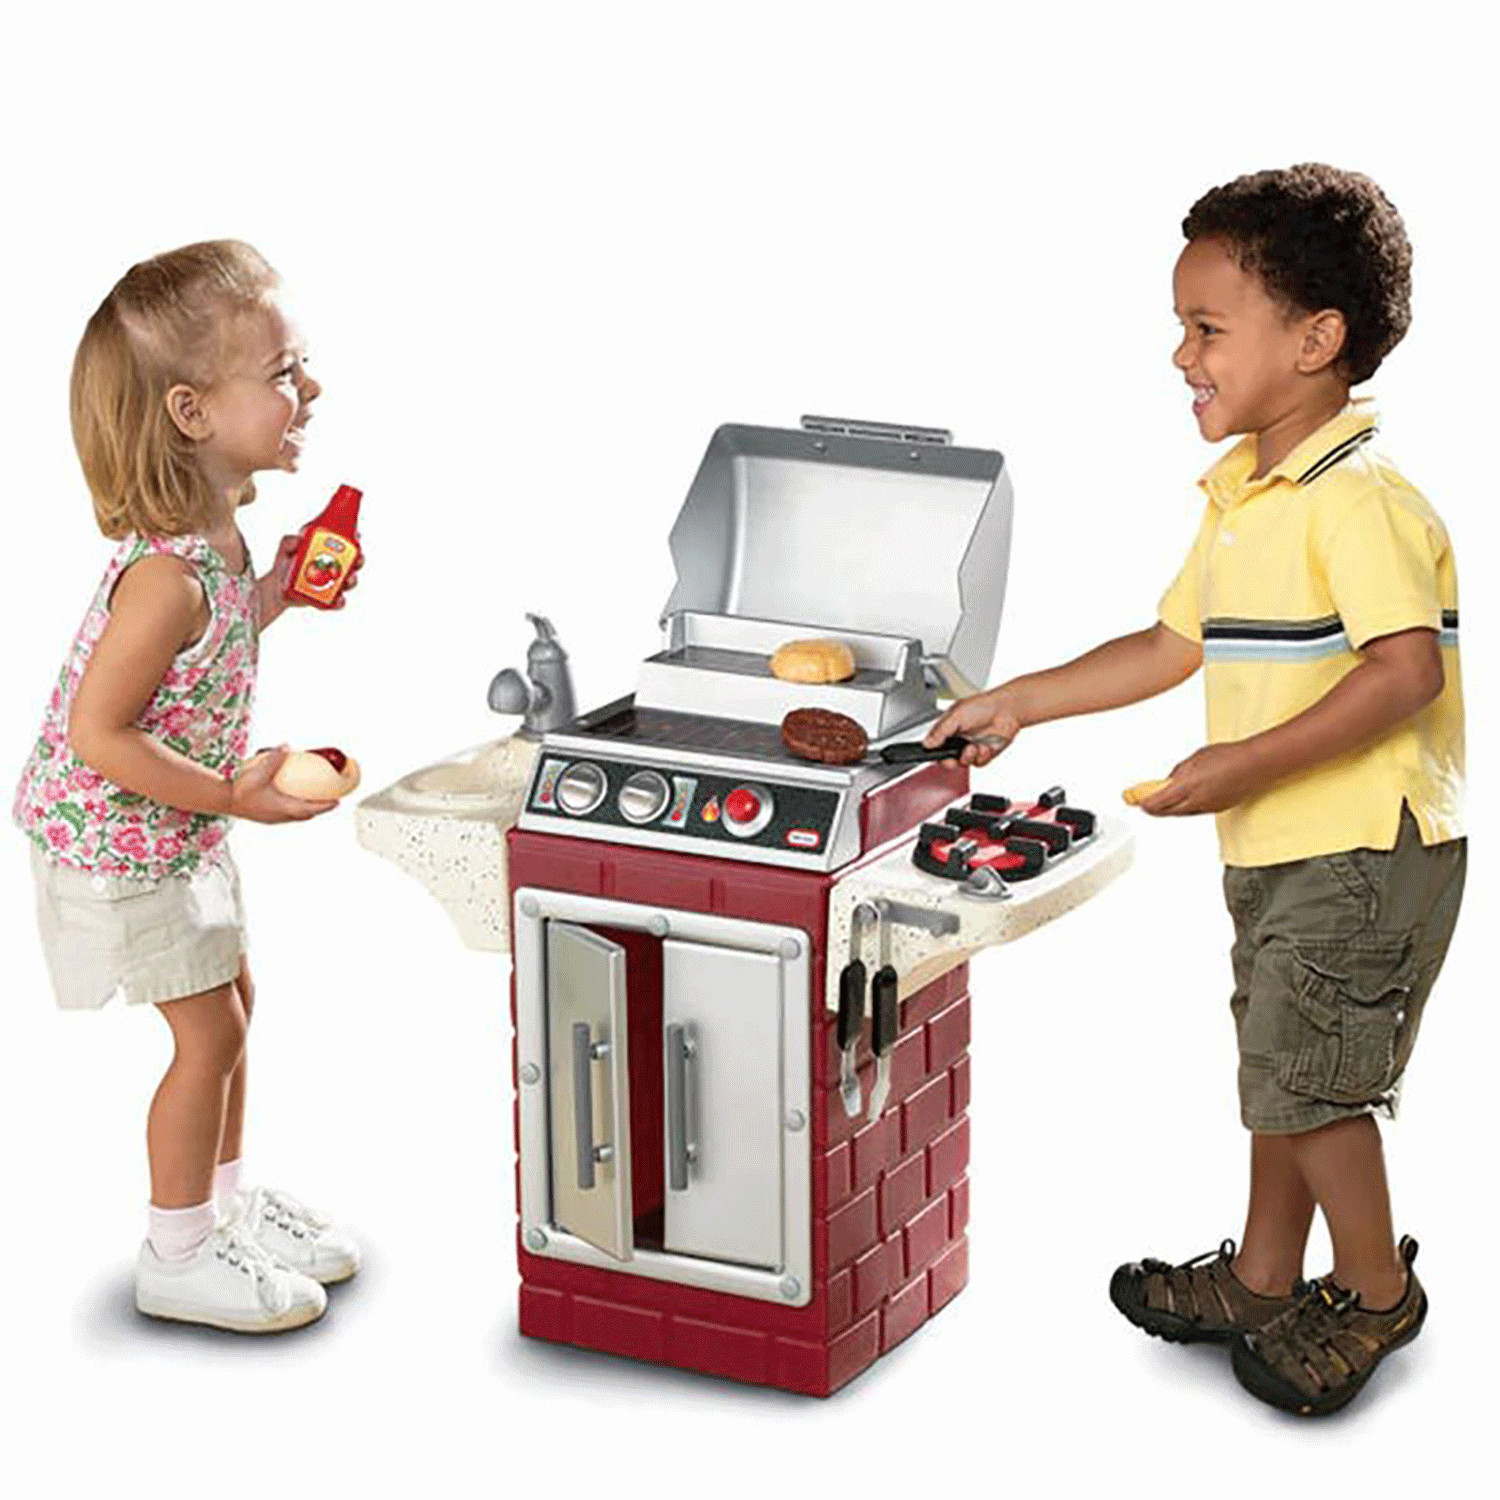 Lil Tikes Backyard Bbq
 Little Tikes Backyard Barbecue Get Out n Grill BBQ Toy